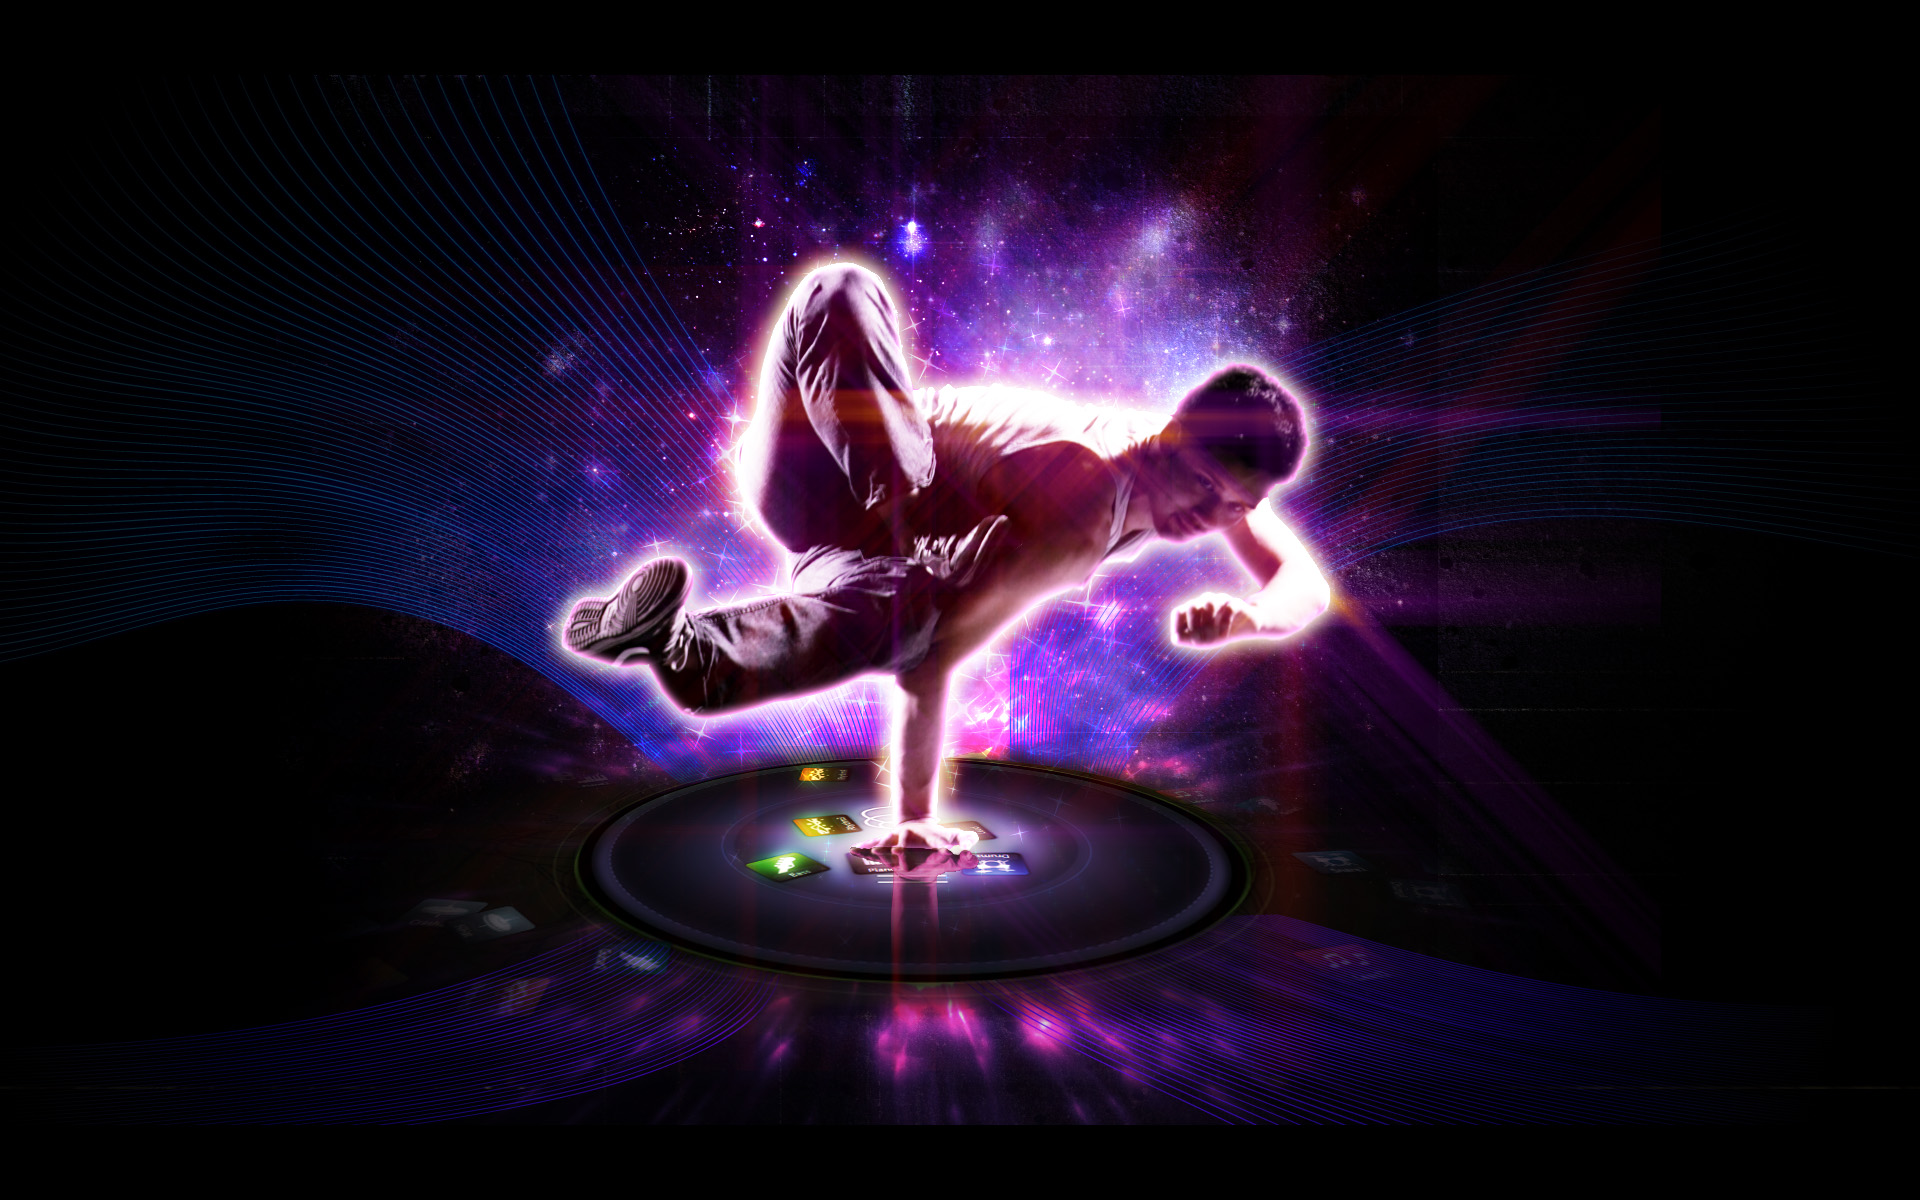 Image Cool Dj Wallpaper 3d Pc Android iPhone And iPad